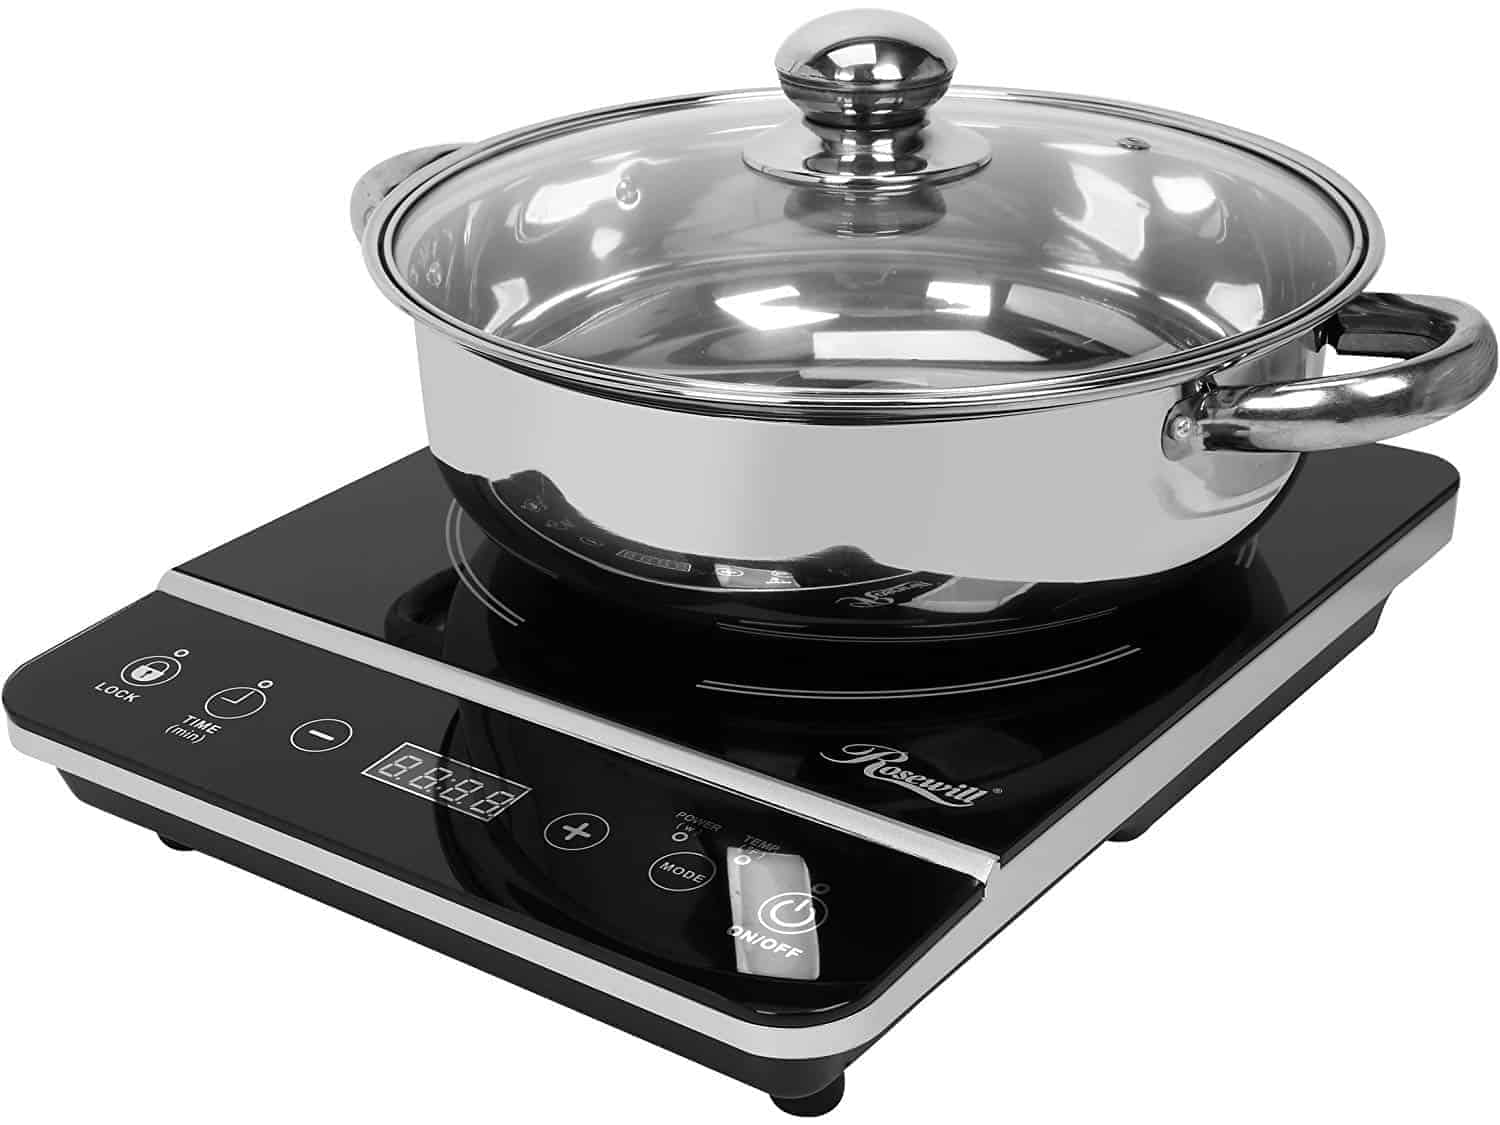 Best cheap portable induction cooktop: Rosewill RHAI-13001